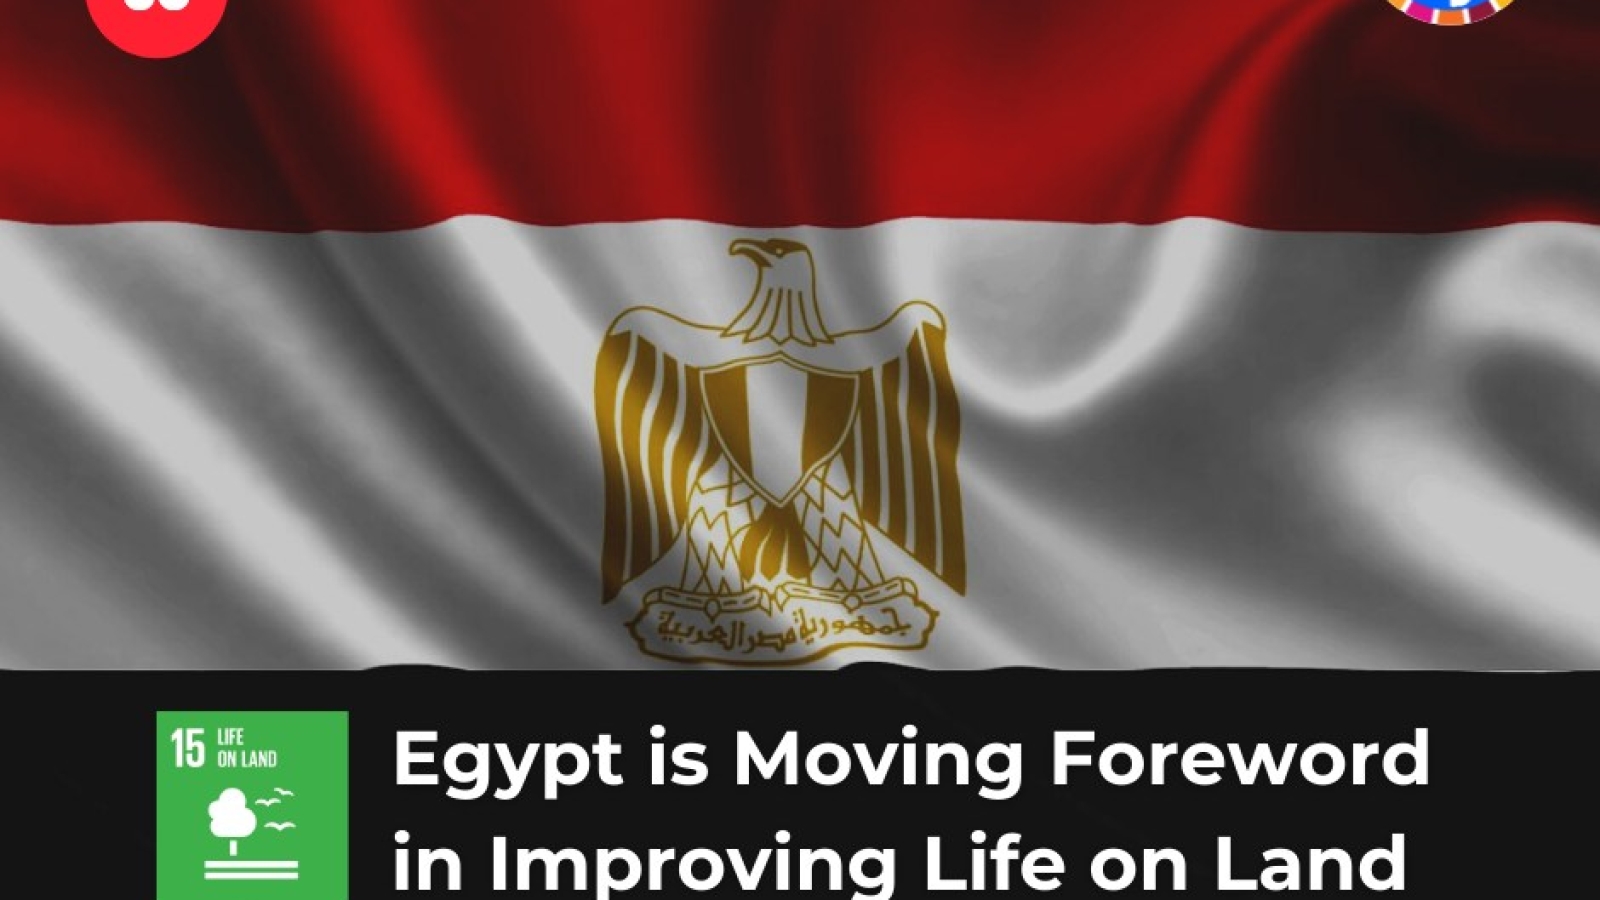 Egypt is Moving Foreword in Improving Life on Land